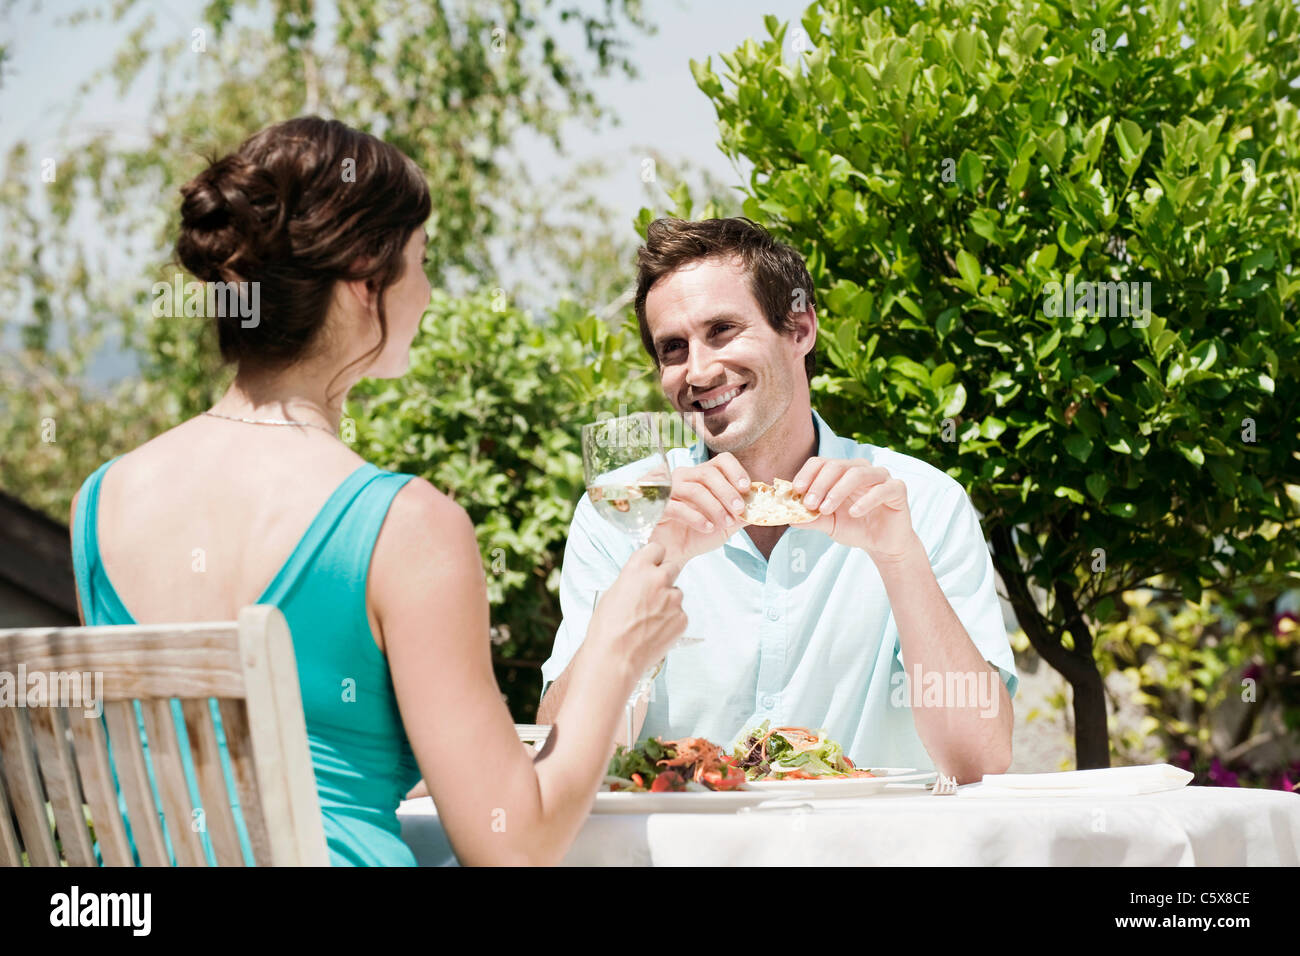 Italy, South Tyrol, Couple in restaurant having lunch Stock Photo